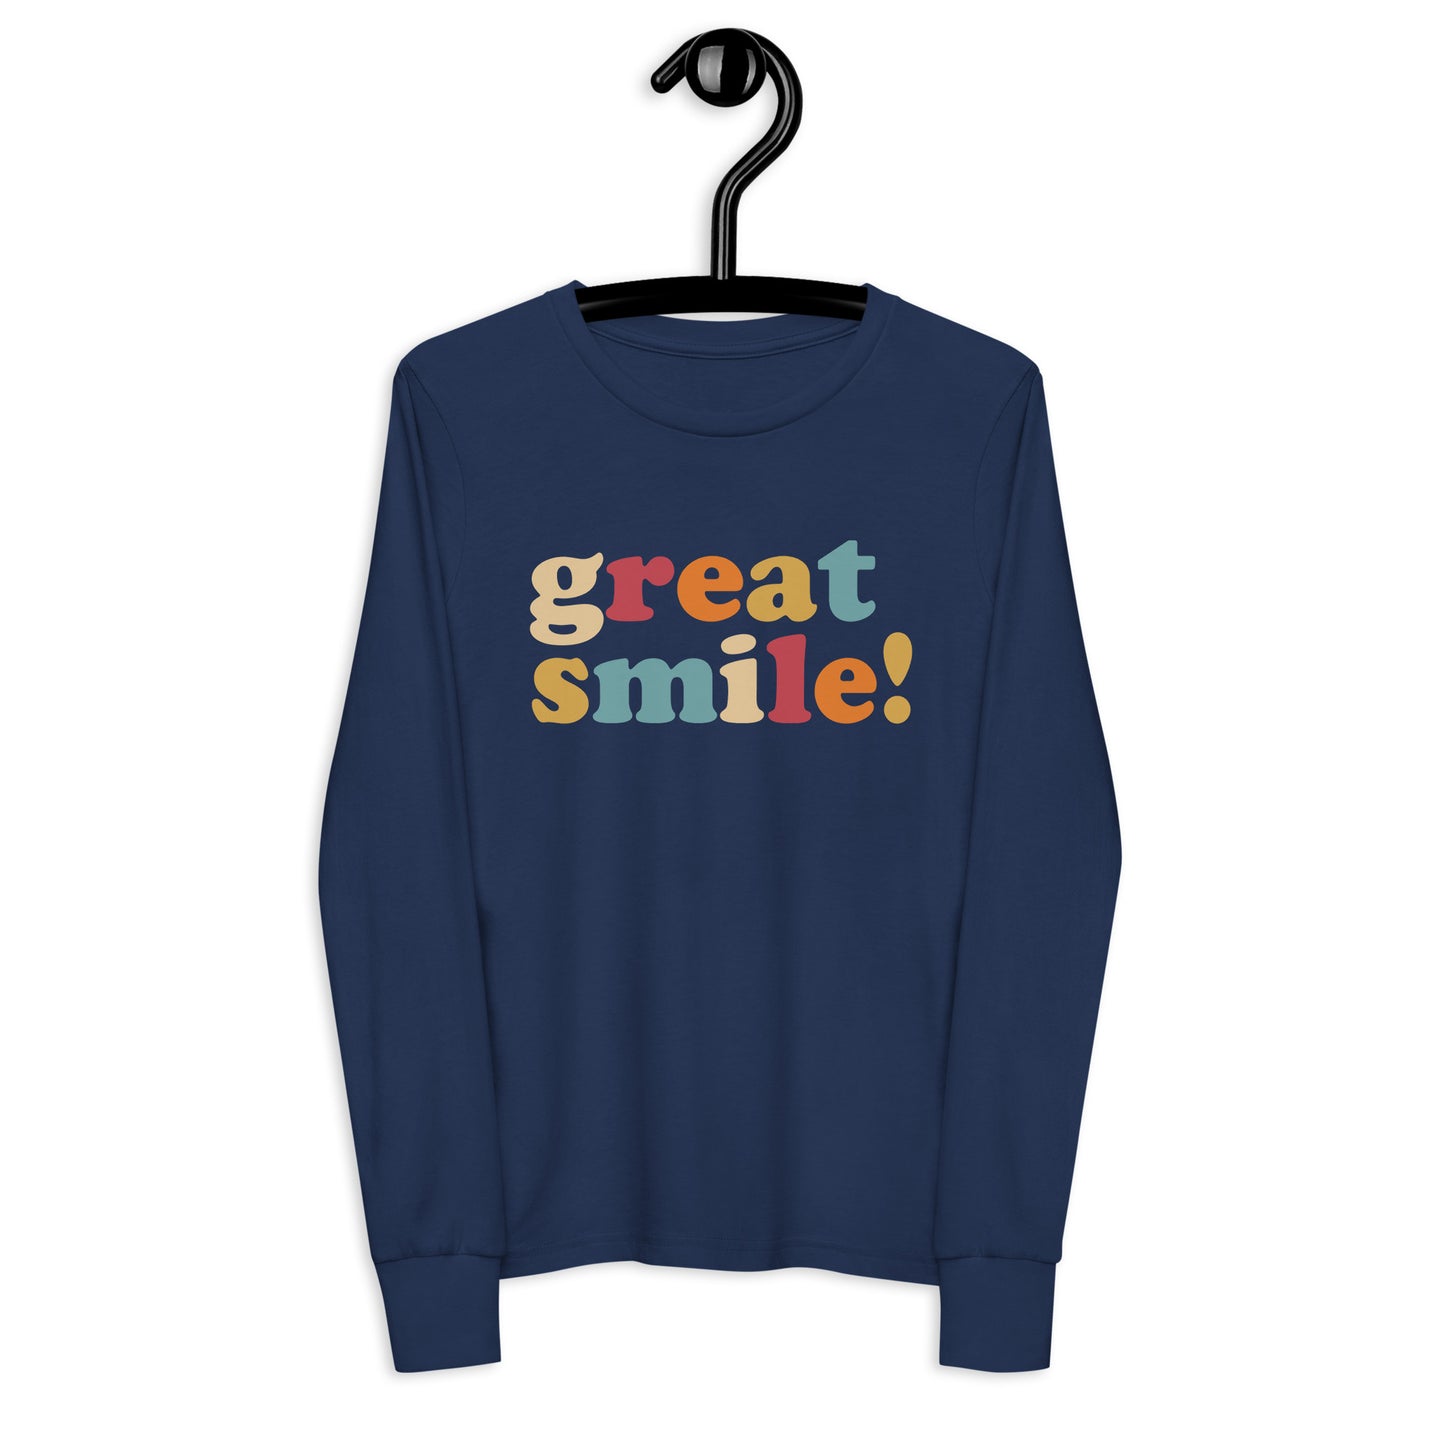 Great Smile! — Youth Long Sleeve Tee